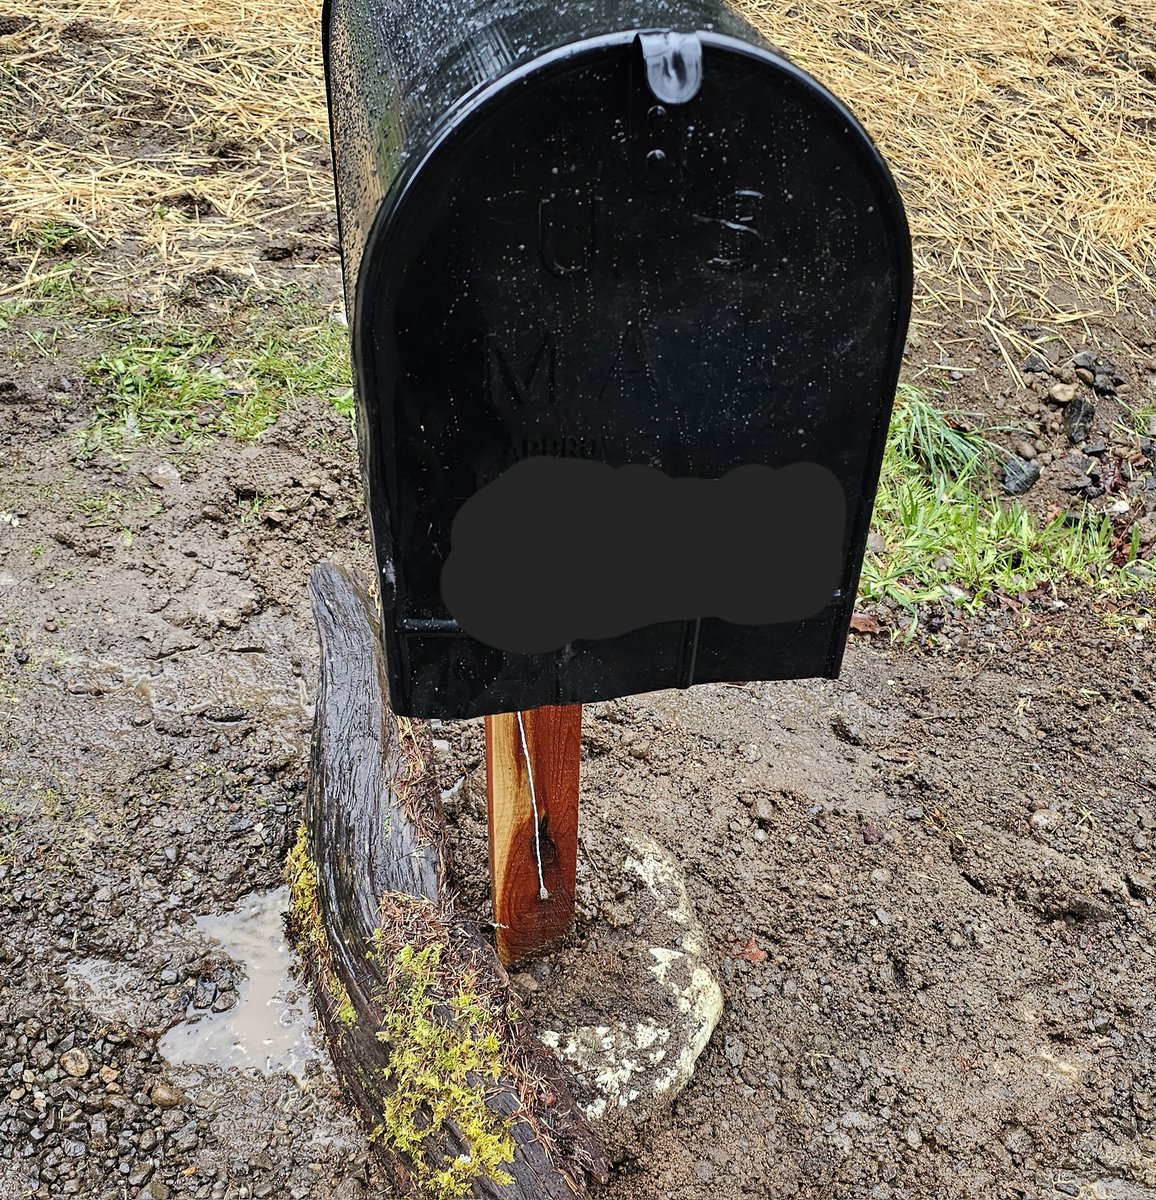 I dabbled in the ancient forbidden art of Mailbox Necromancy using a wrench, a shovel, and spite. The mailbox yet lives. Even if legal action goes nowhere I have already won. Eat shit Comcast.